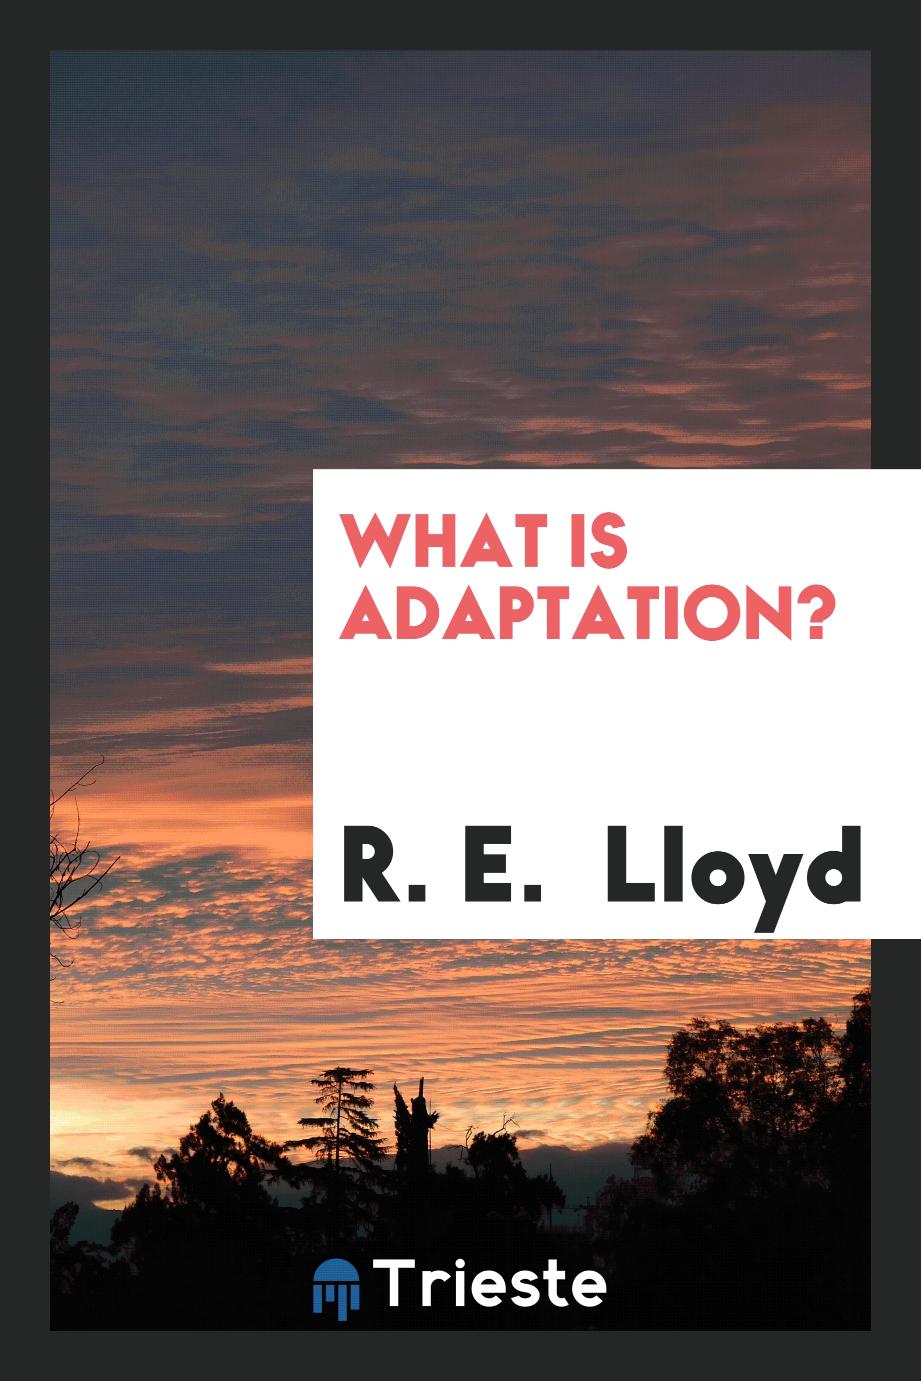 What is Adaptation?